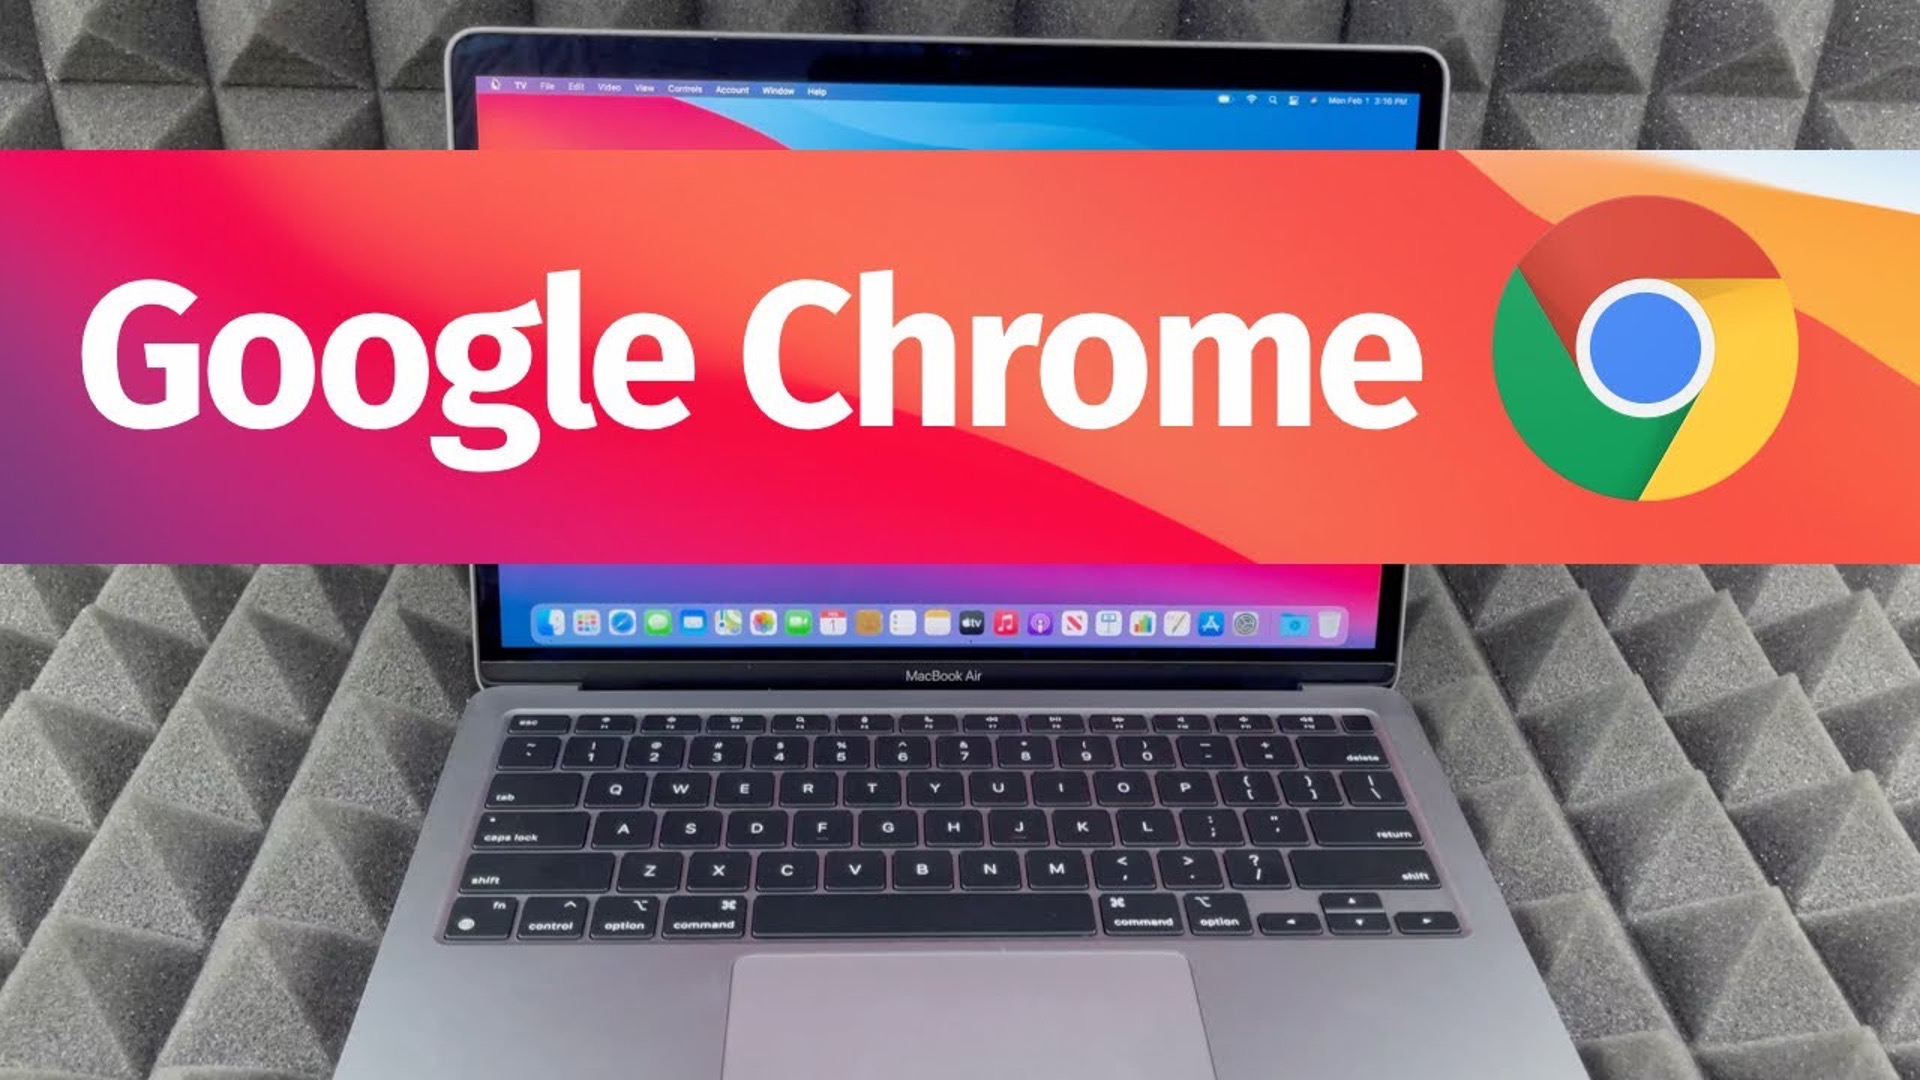 How To Get Google Chrome On Macbook Pro